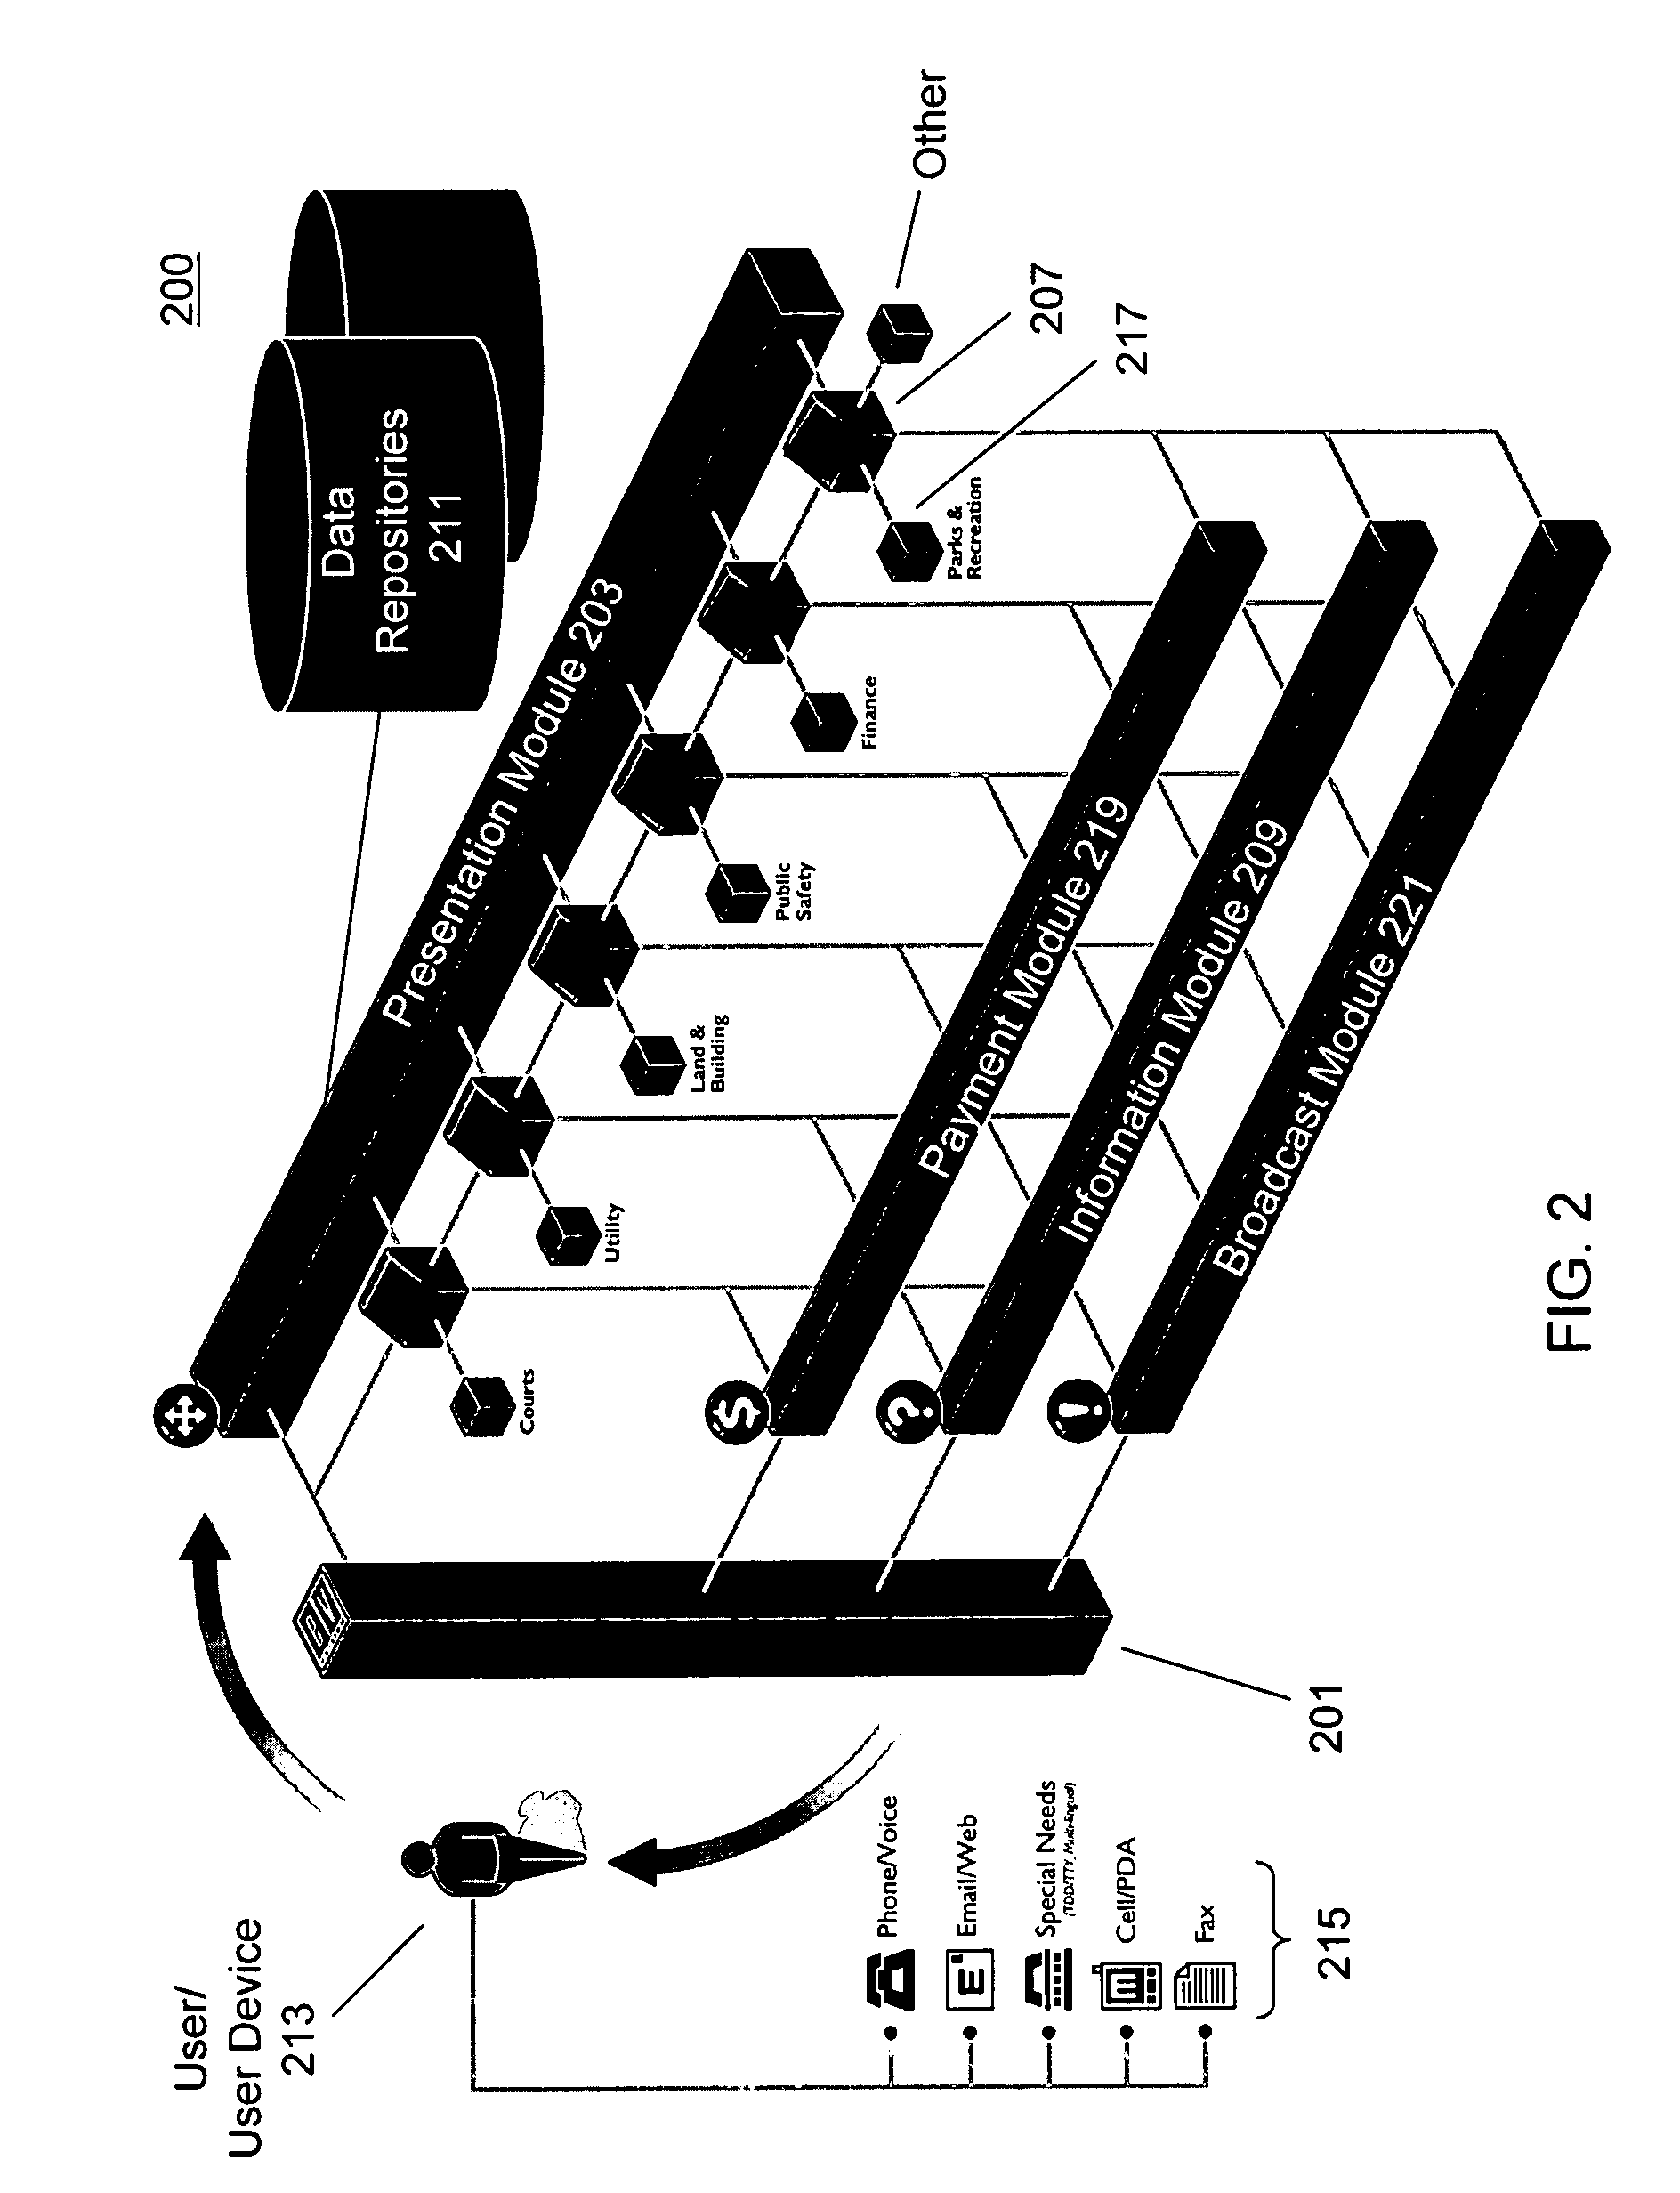 System and method for multi-channel inbound and outbound communications